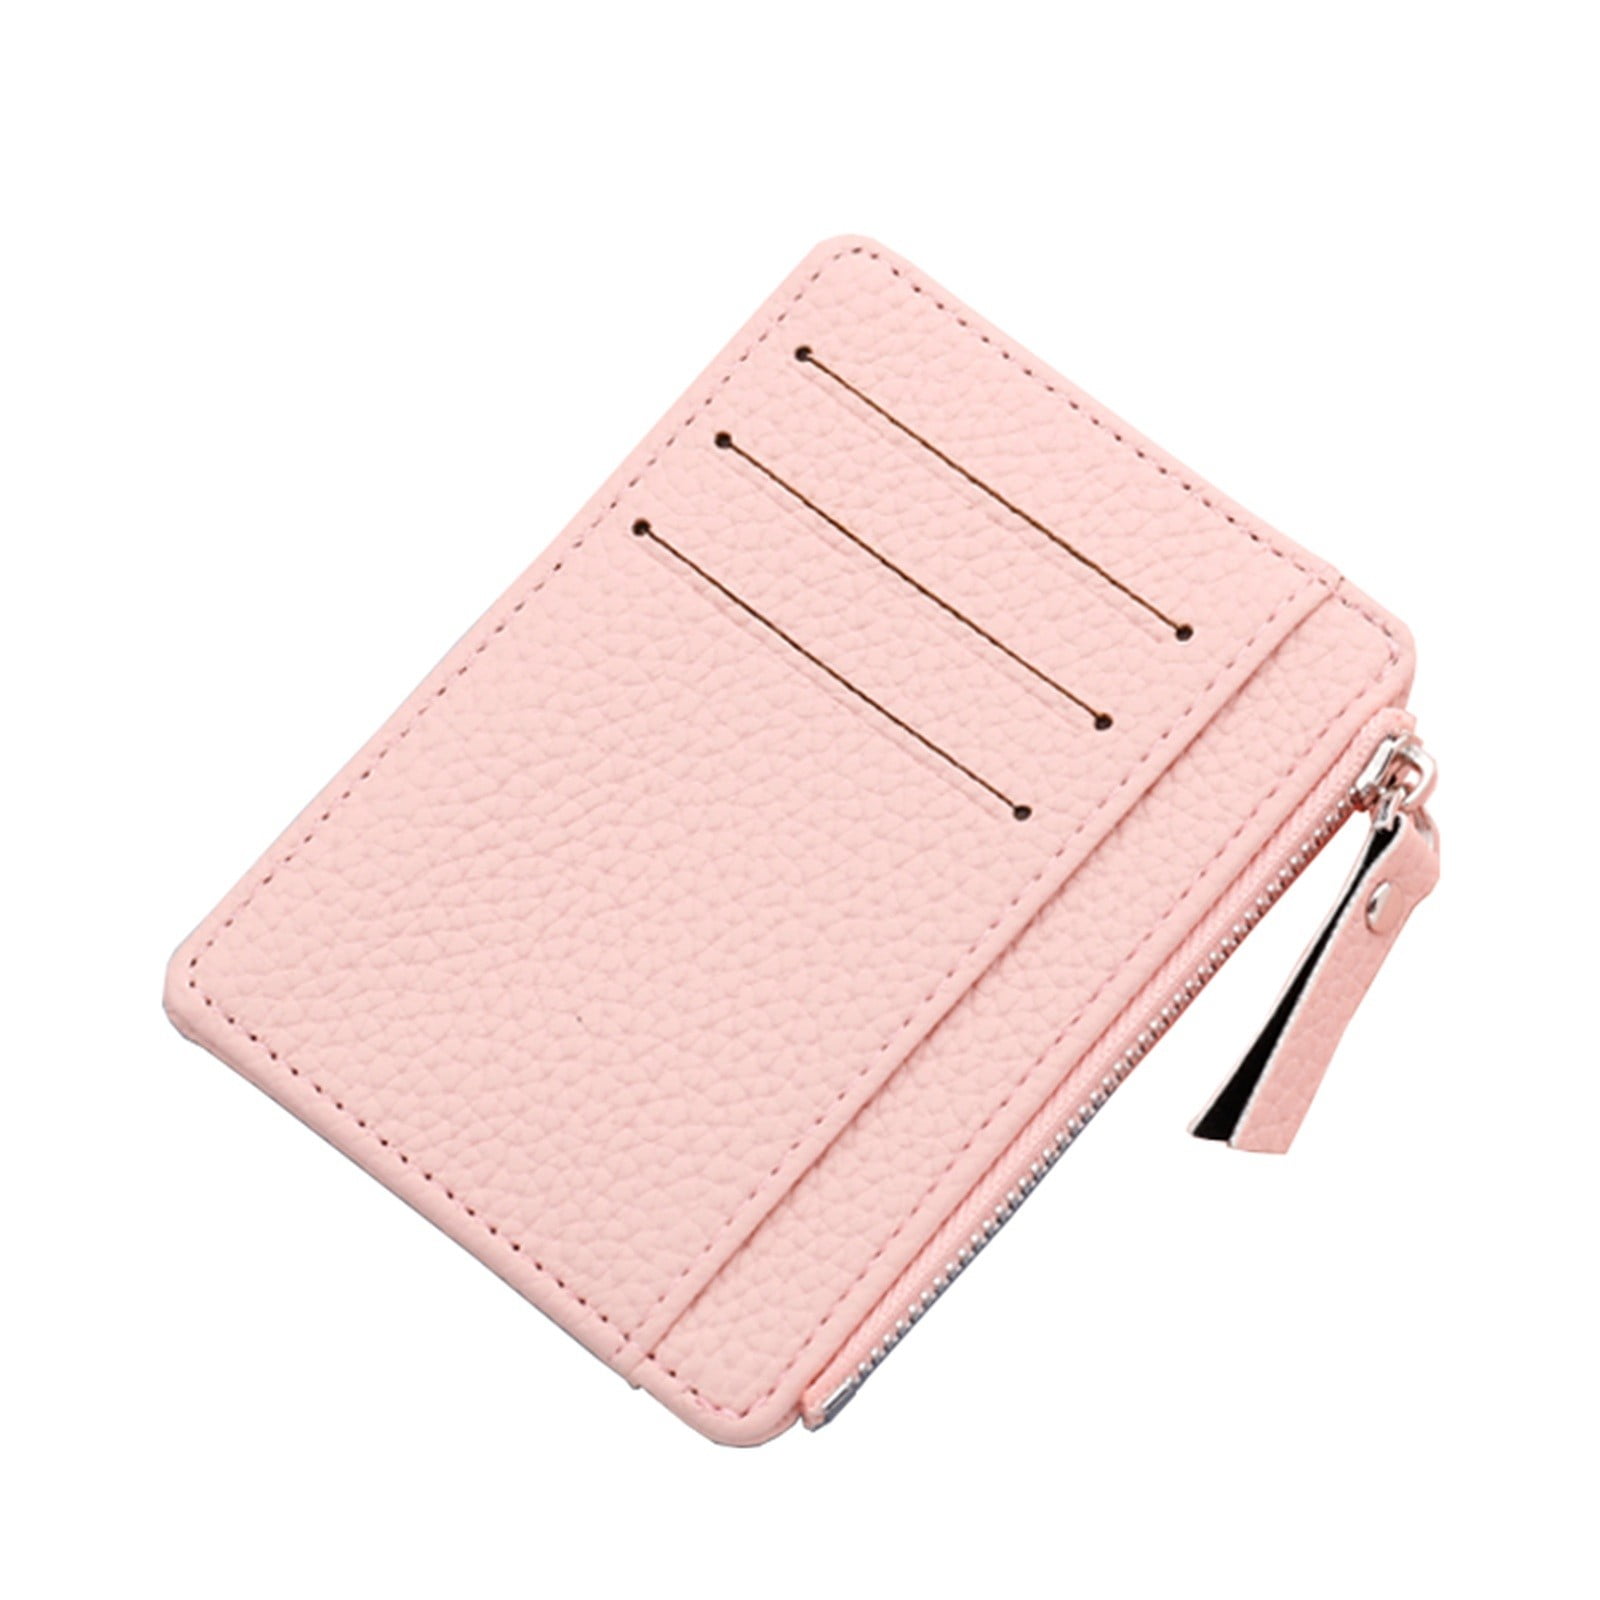 2dxuixsh Wallets for Women Small Cute Small Wallet for Girls Women PU Leather Two Folded Flowers Pocket with Card Holder Slim Short Wallet Mens Case